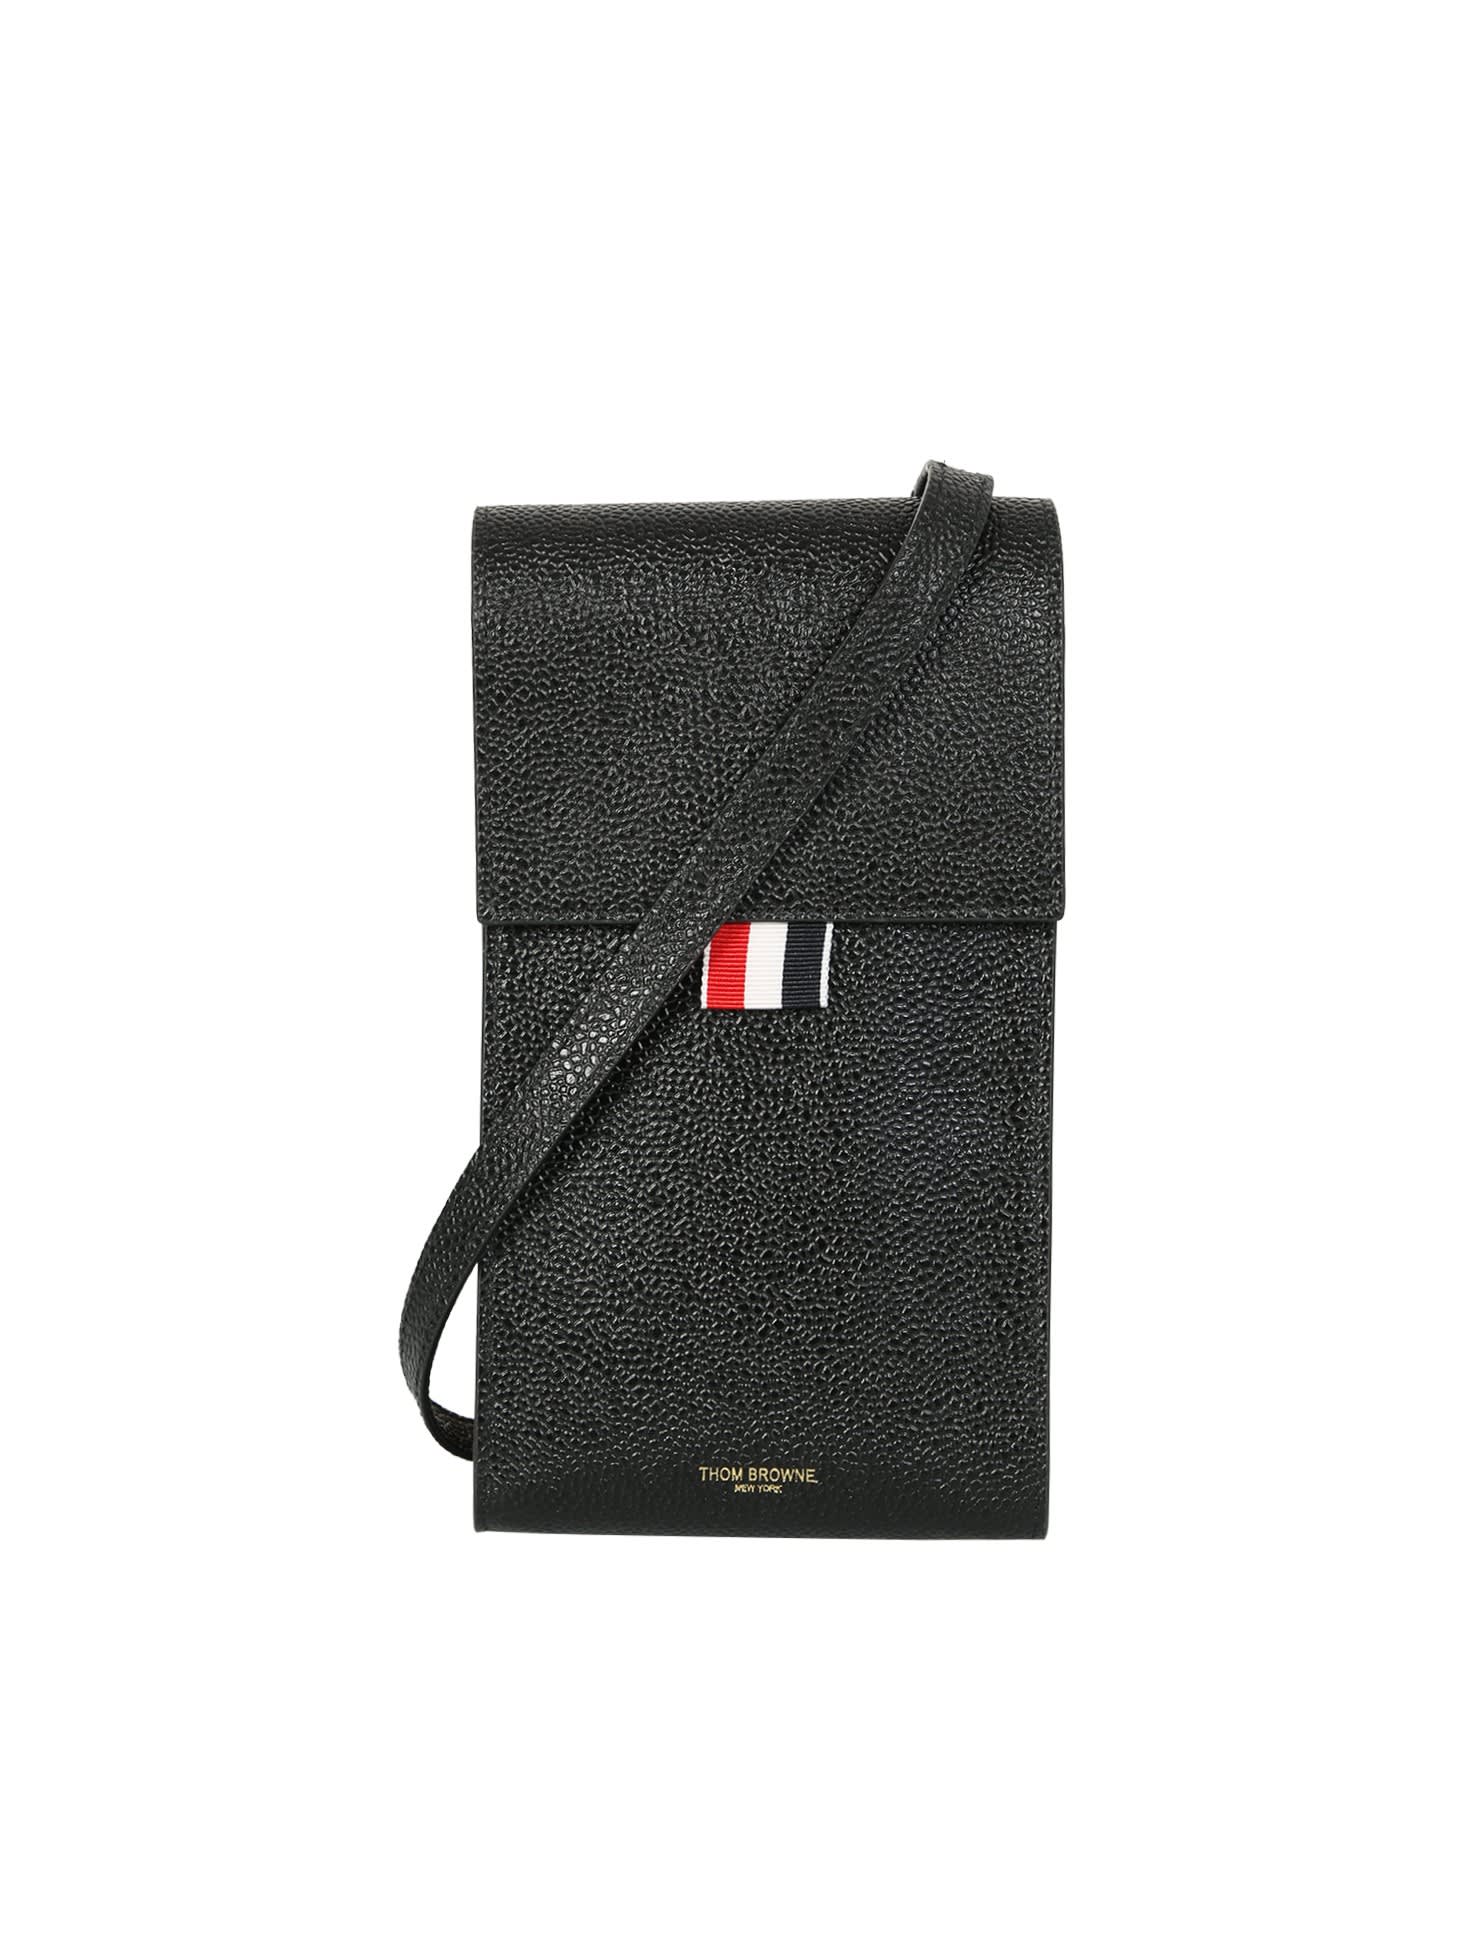 Thom Browne Smartphone Case Made In Leather In Black | ModeSens